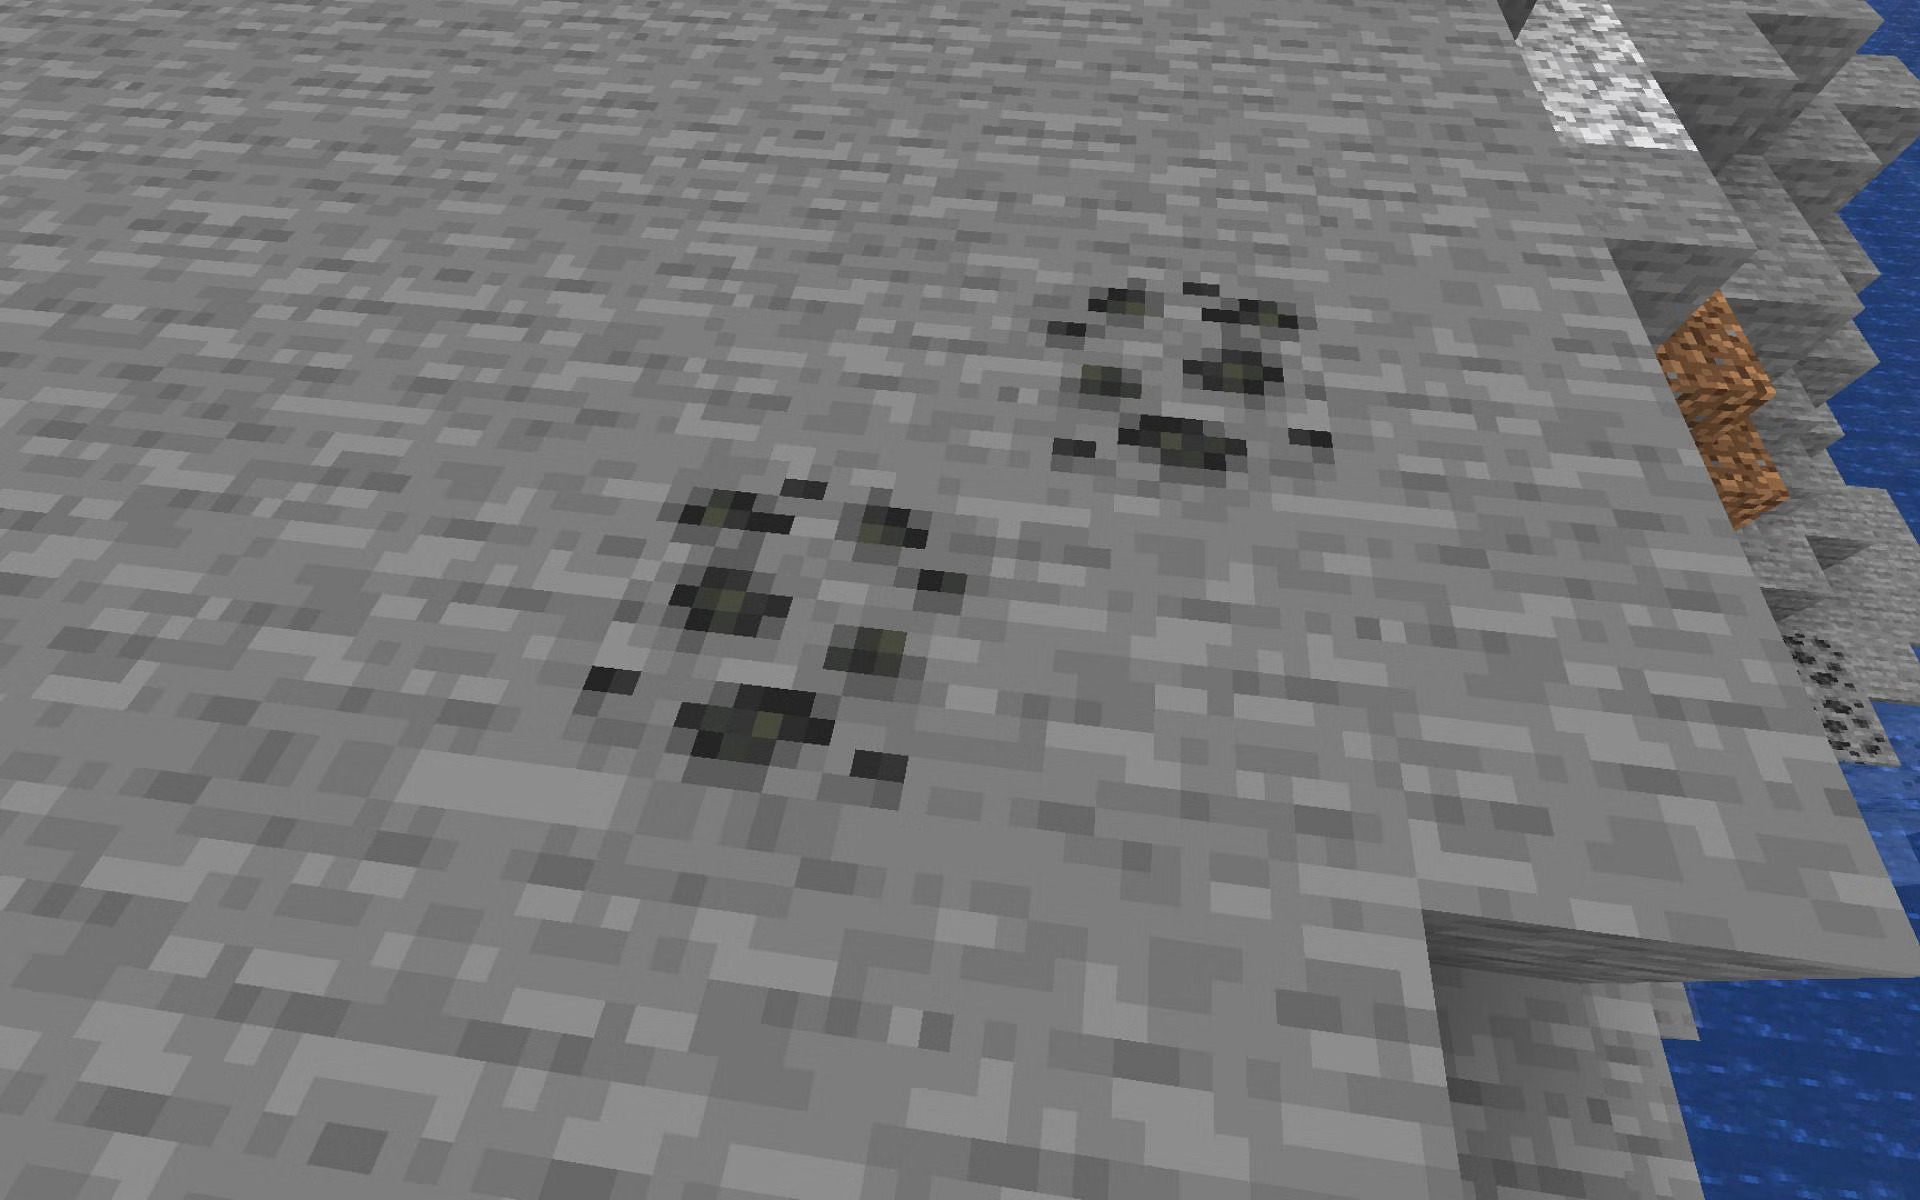 Where to find Coal in Minecraft